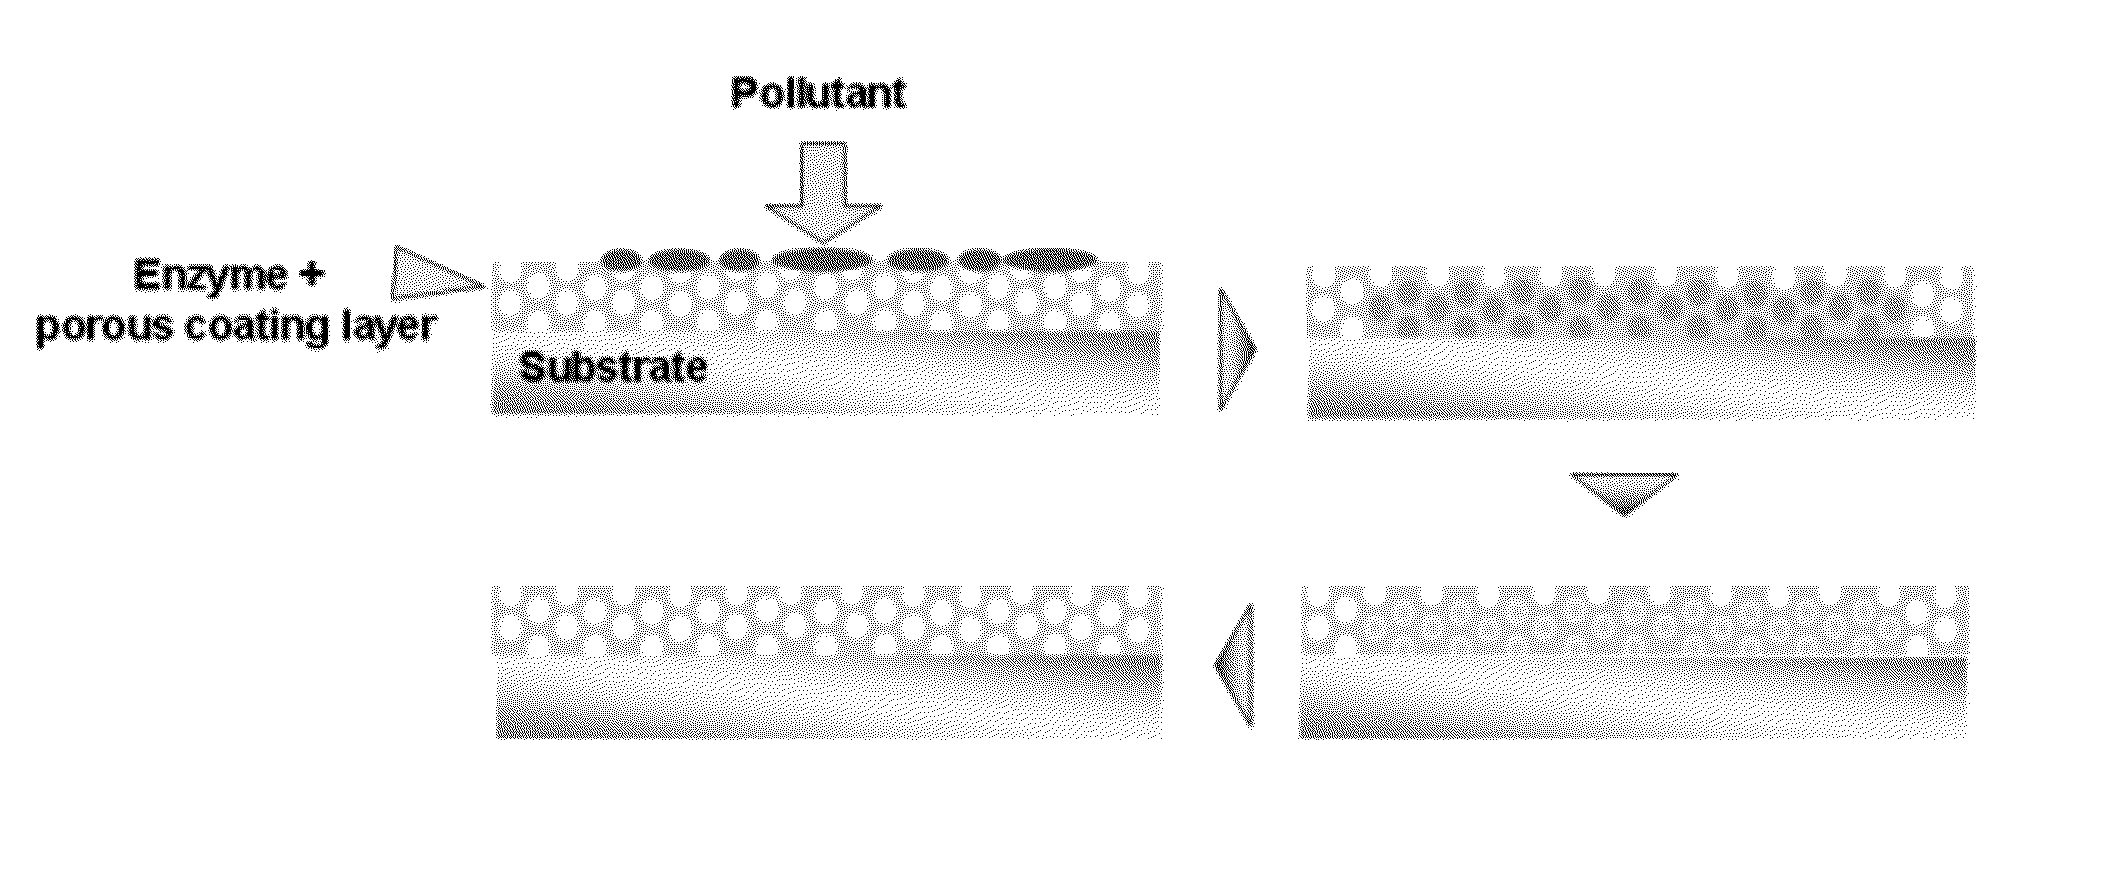 Porous structure for forming Anti-fingerprint coating, method of forming Anti-fingerprint coating, substrate comprising the Anti-finger-print coating formed by the method, and product comprising the substrate